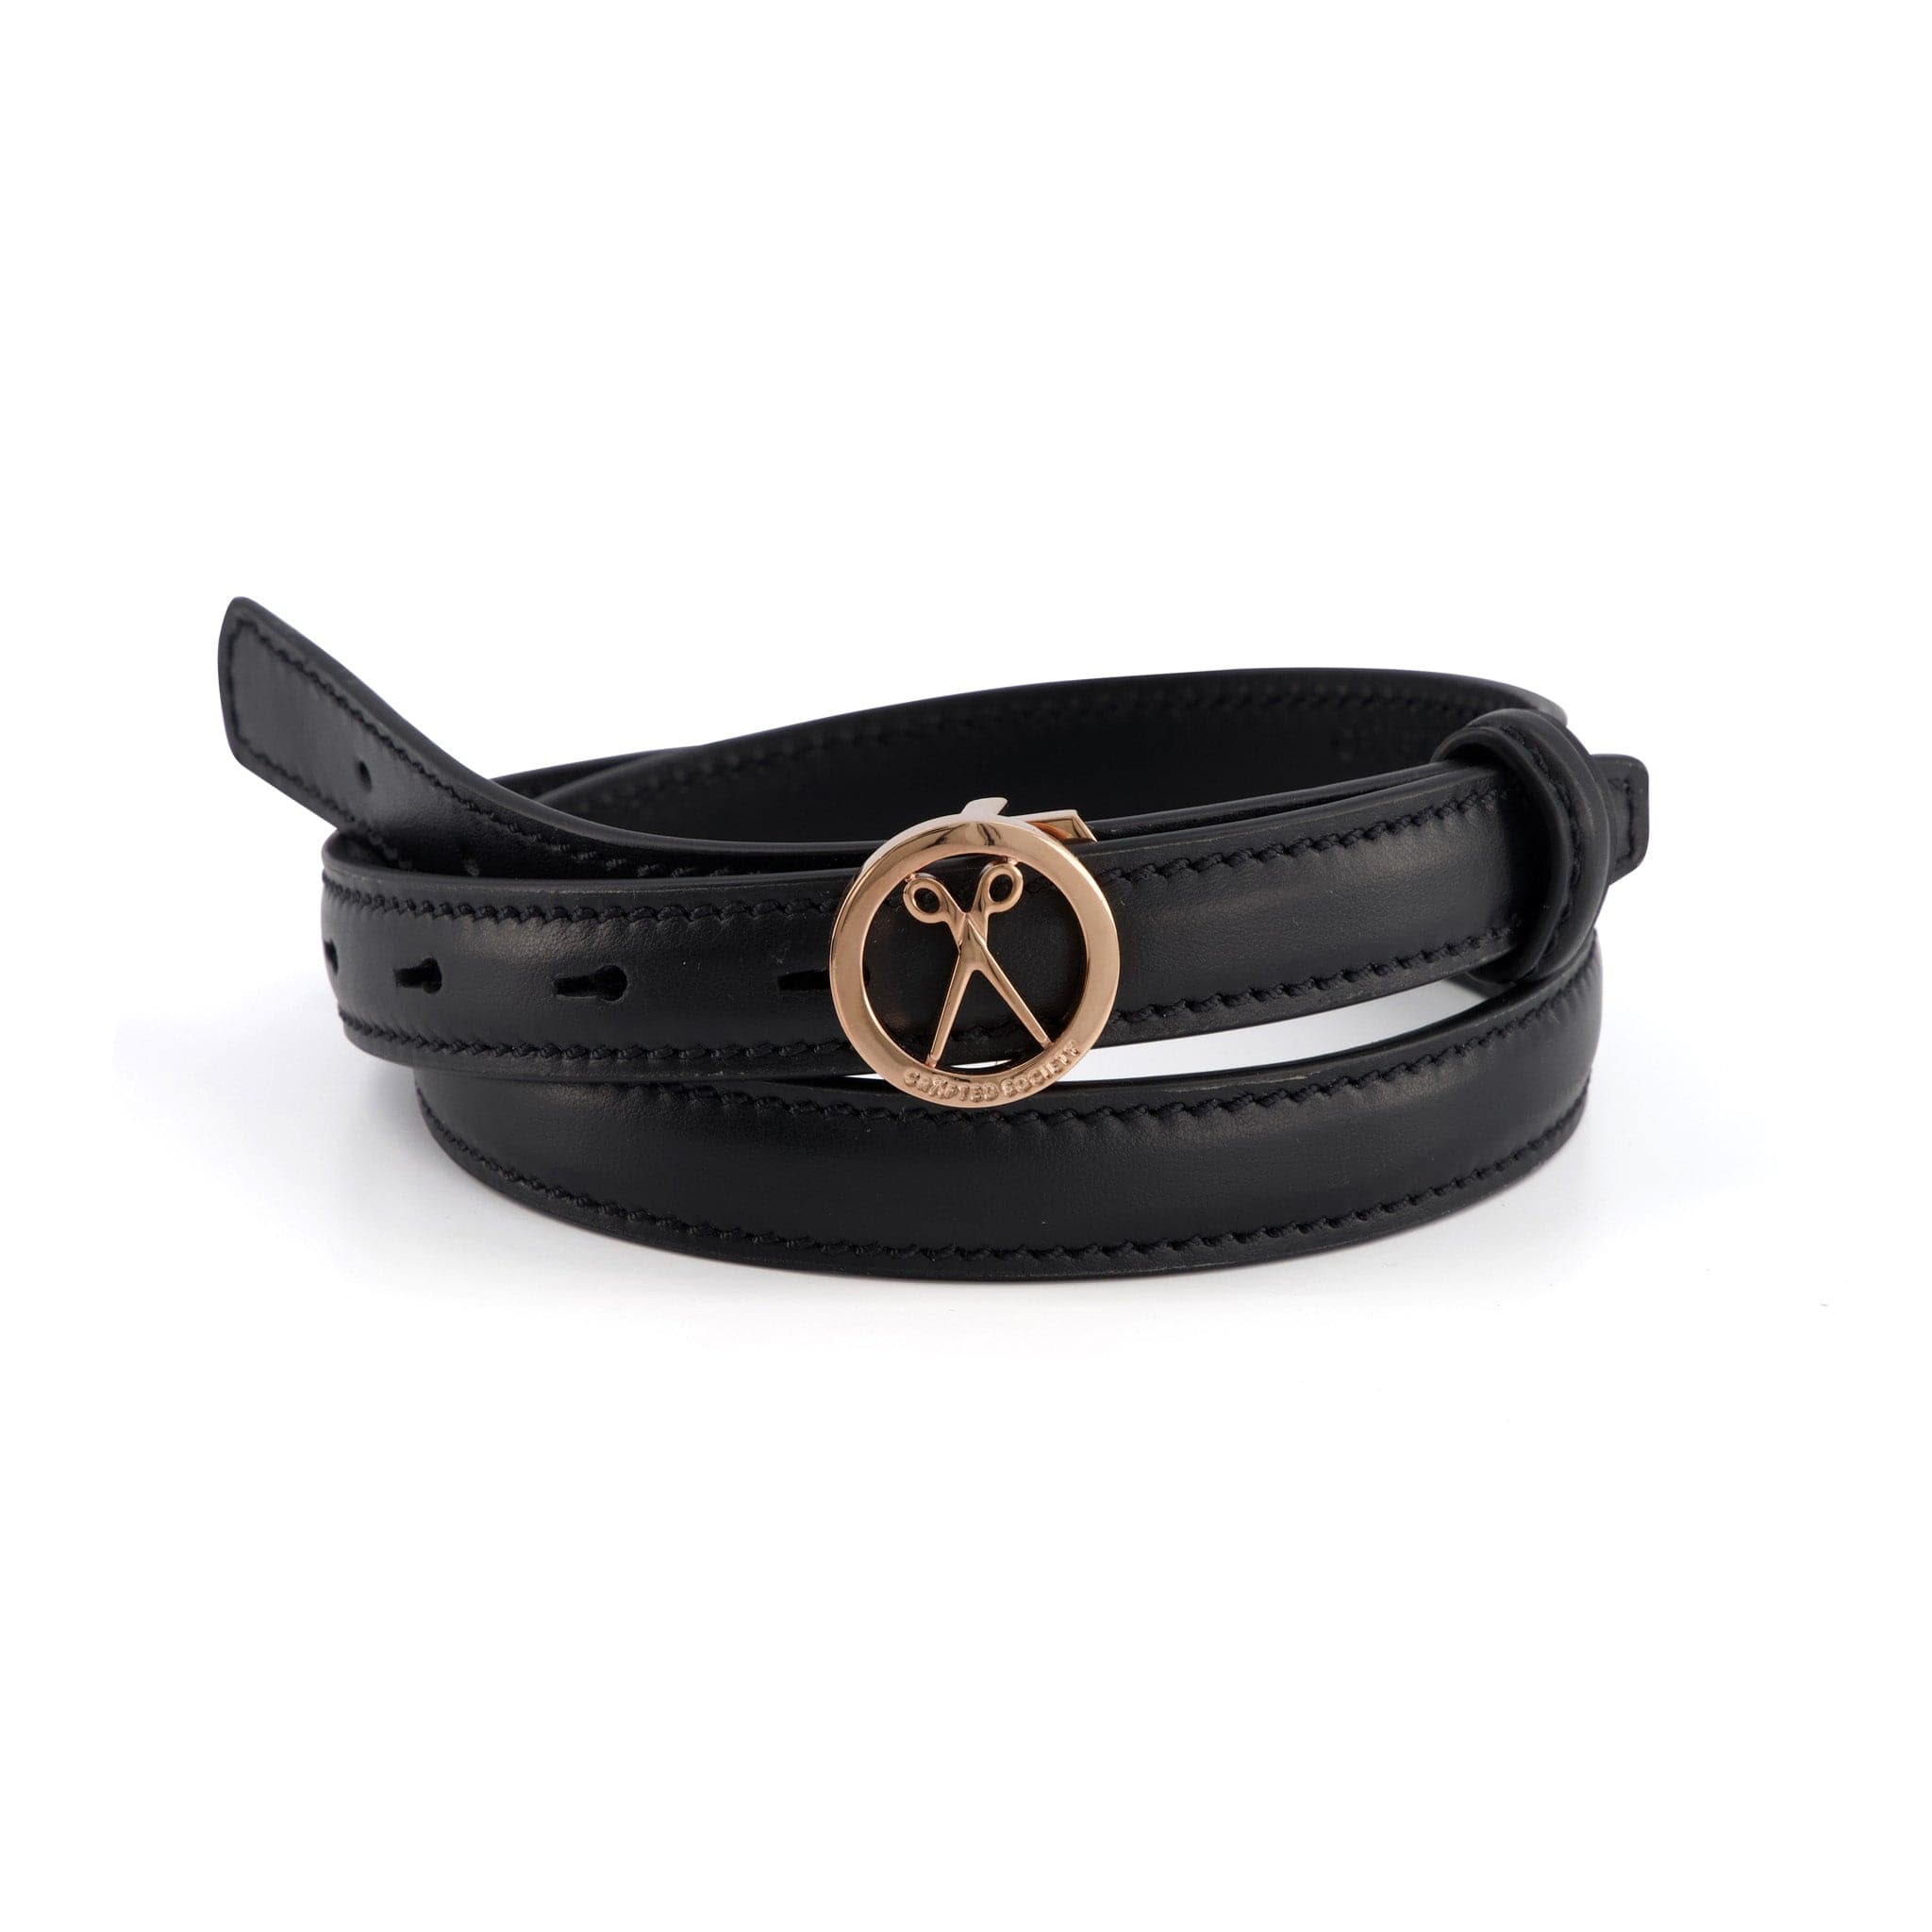 Black Nappa Leather Belt | 2.0cm | 2 Buckles | Made in Italy